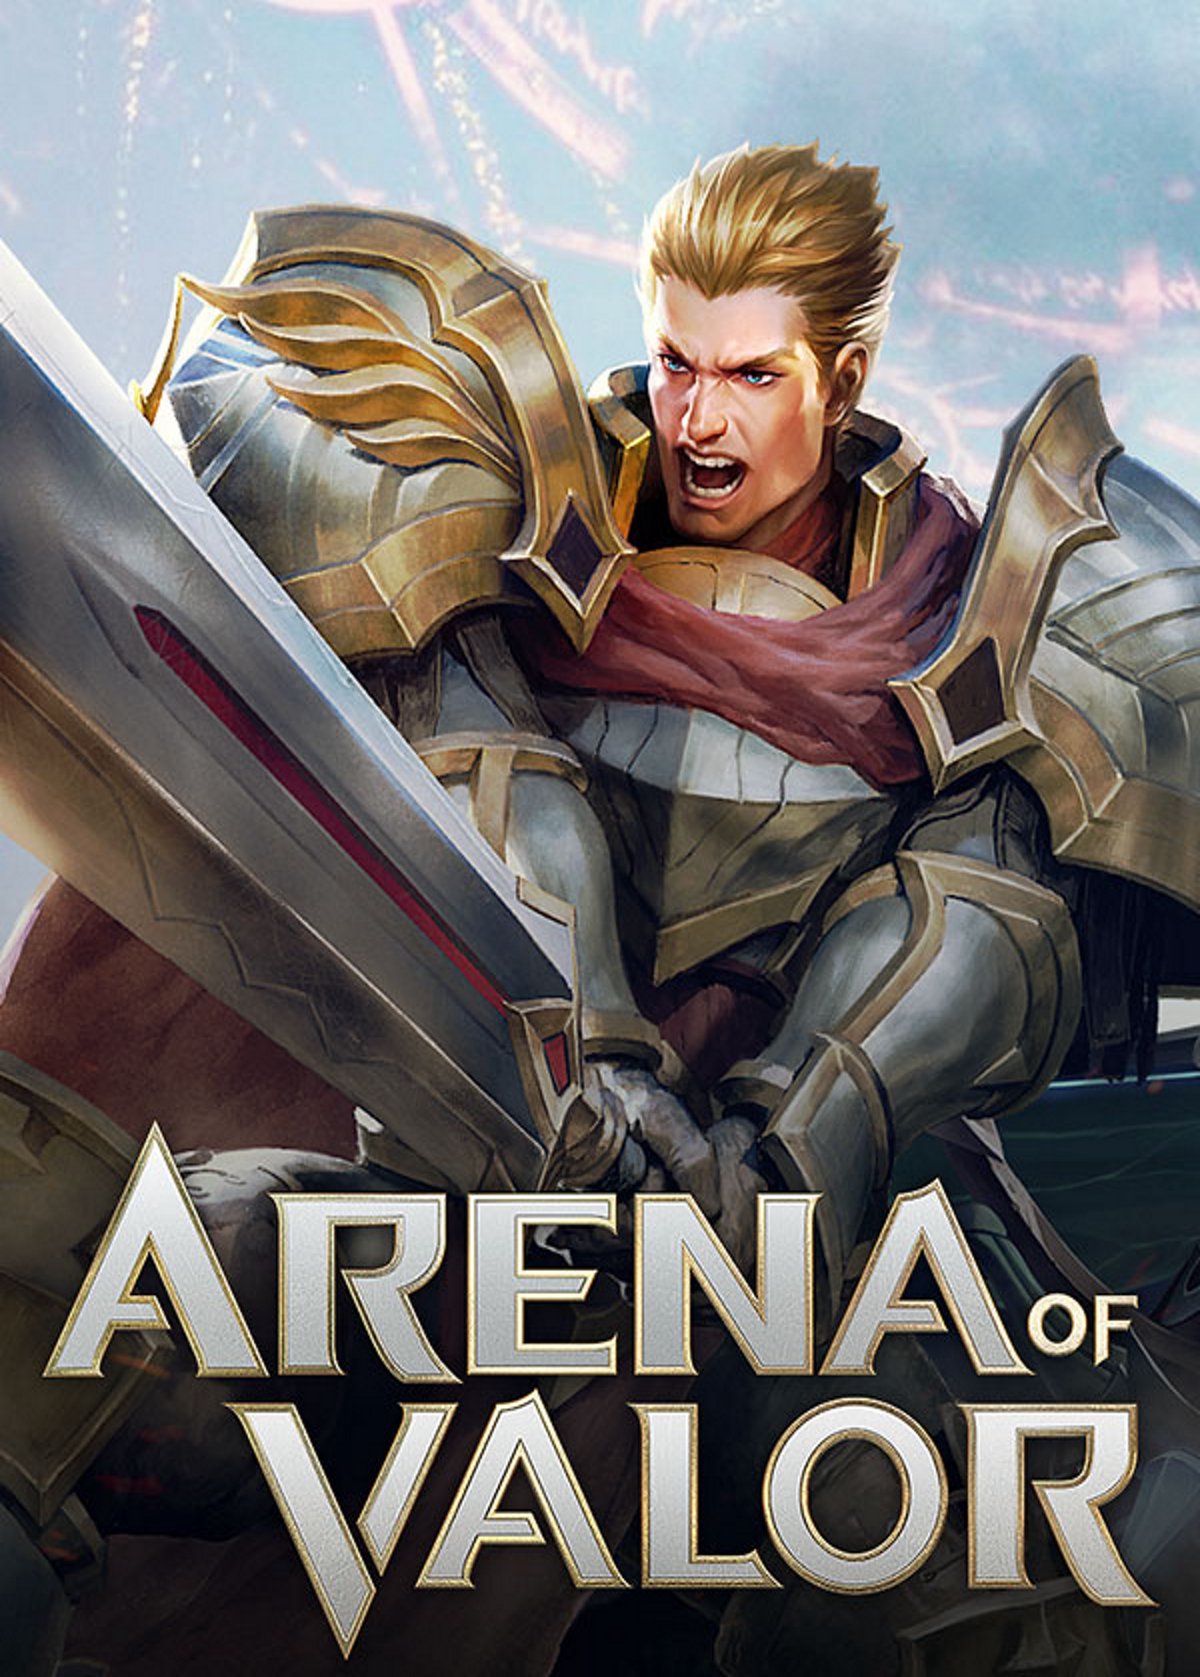 Super Arcana Guide in Arena of Valor